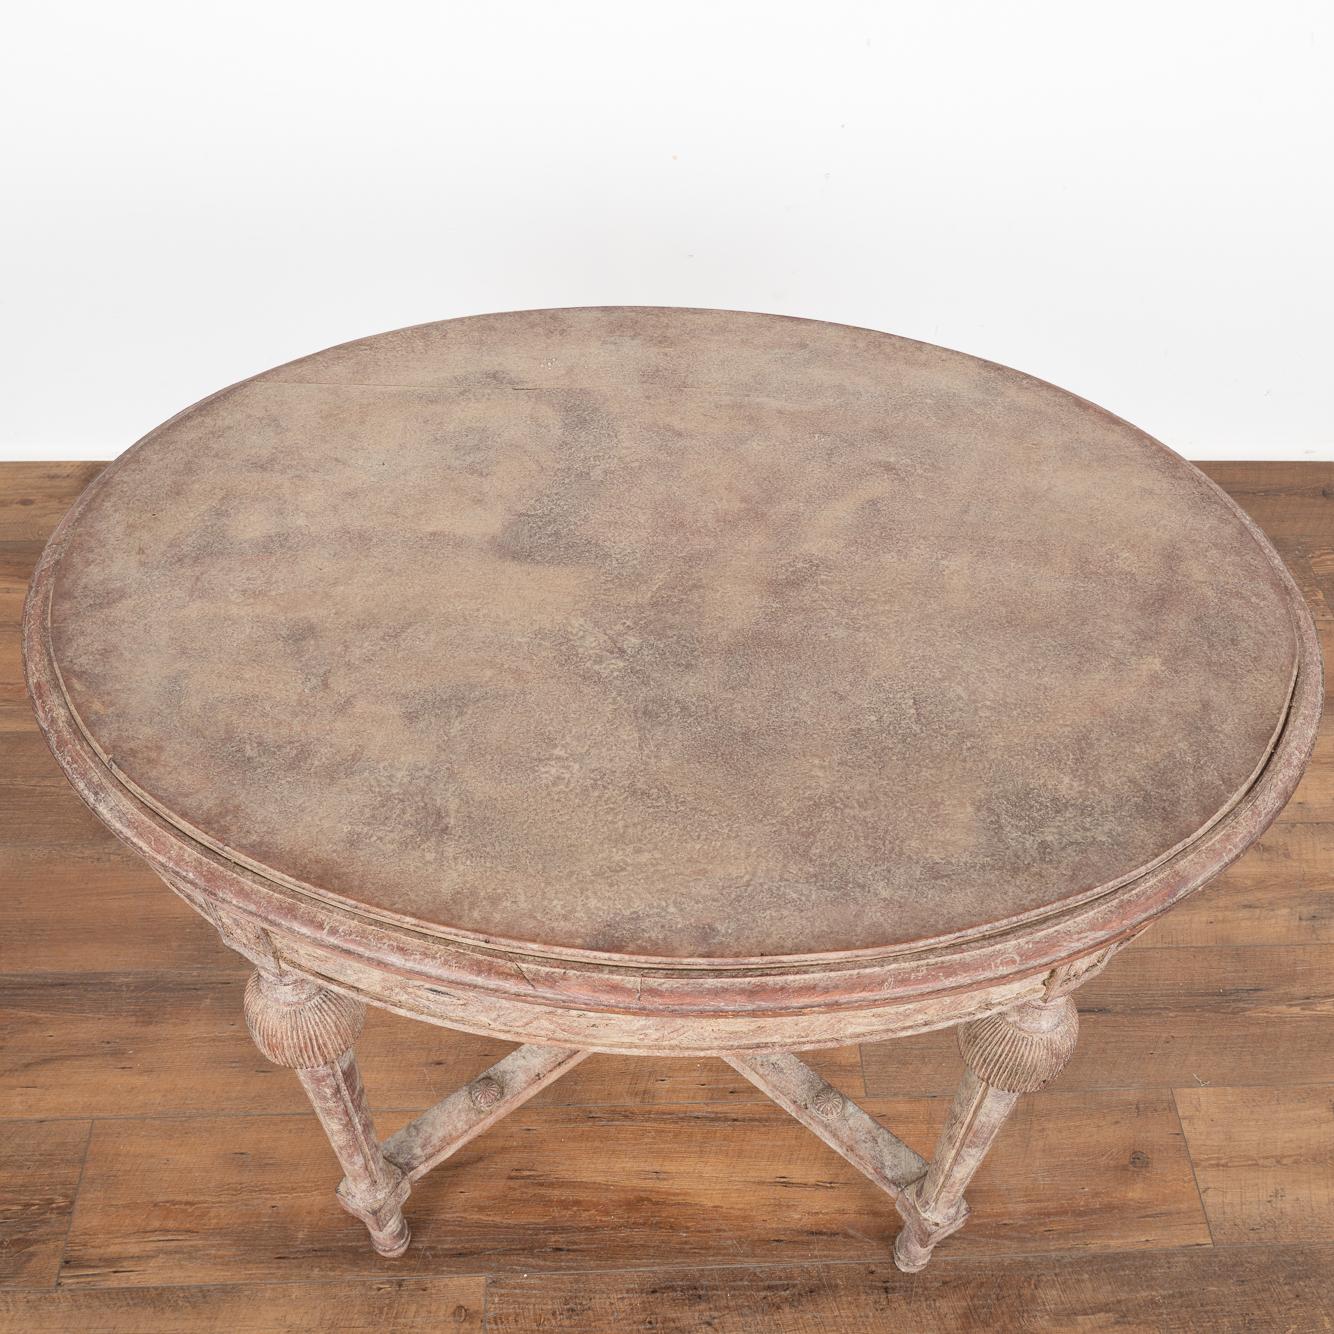 Swedish Antique Oval Painted Side Table, Sweden circa 1850-70 For Sale